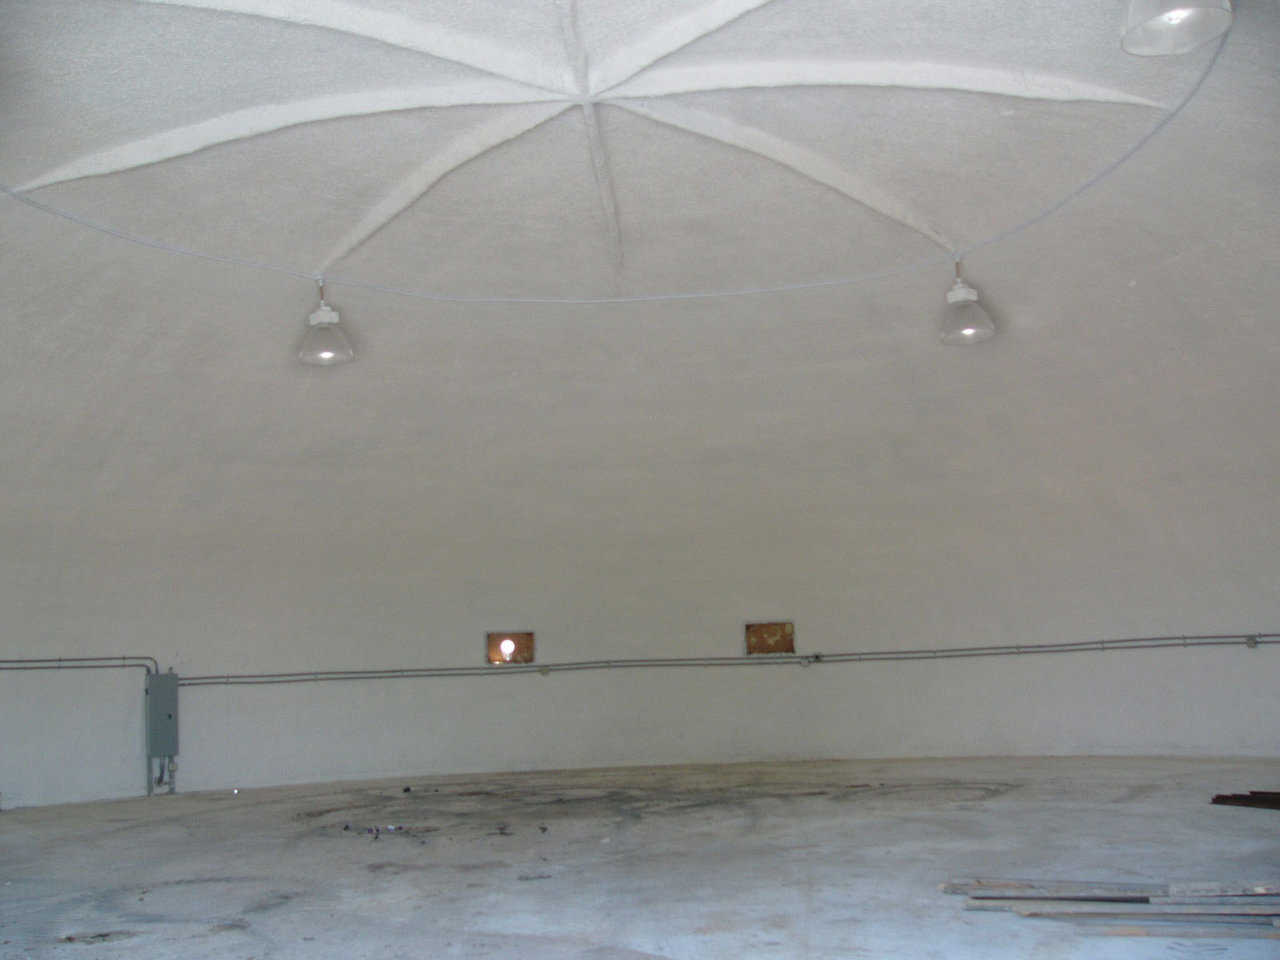 Figure 7 — Ribs strengthening top of oblate ellipse dome at Monolithic.